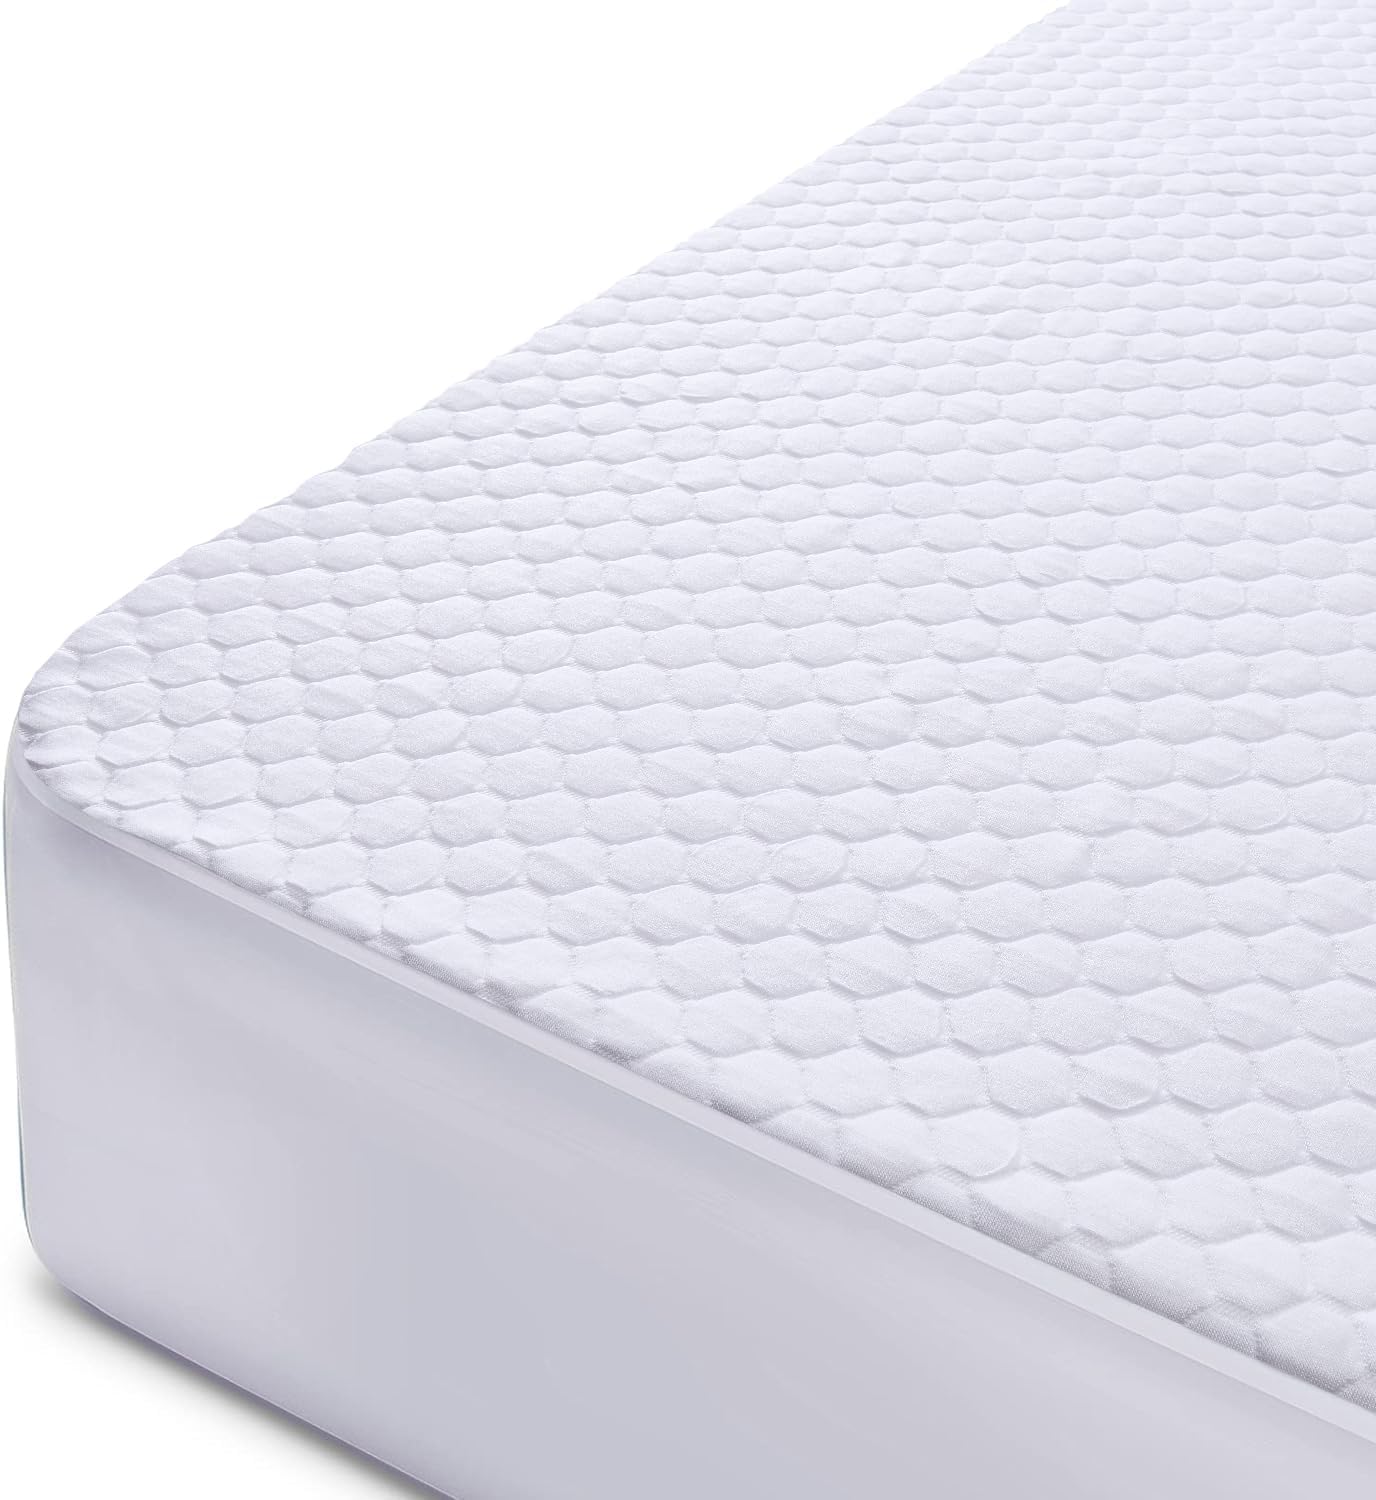 Queen Size Mattress Protector, Waterproof Bamboo Rayon Mattress Pad Cover with Deep Pocket for 6-18 inches Mattress